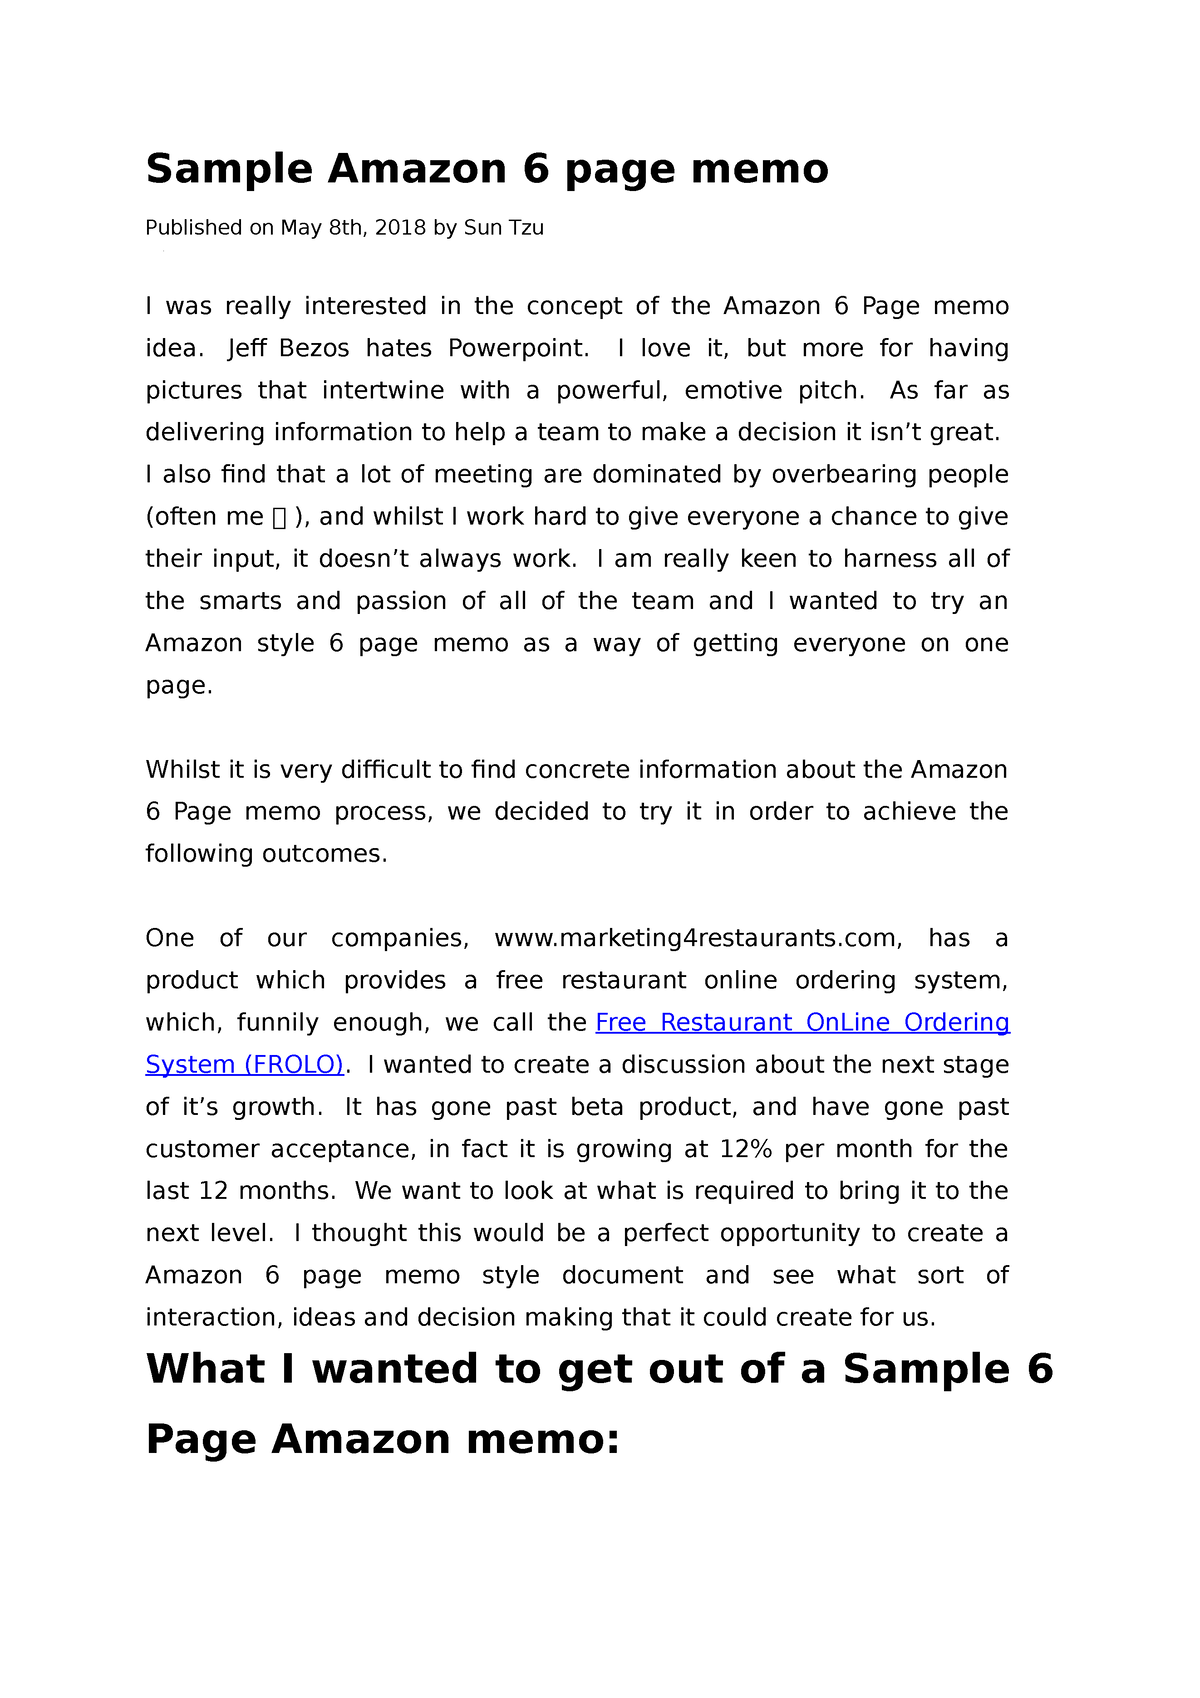 Sample Amazon 6 Page Memo Sample Amazon 6 Page Memo Published On May 8th 2018 By Sun Tzu I